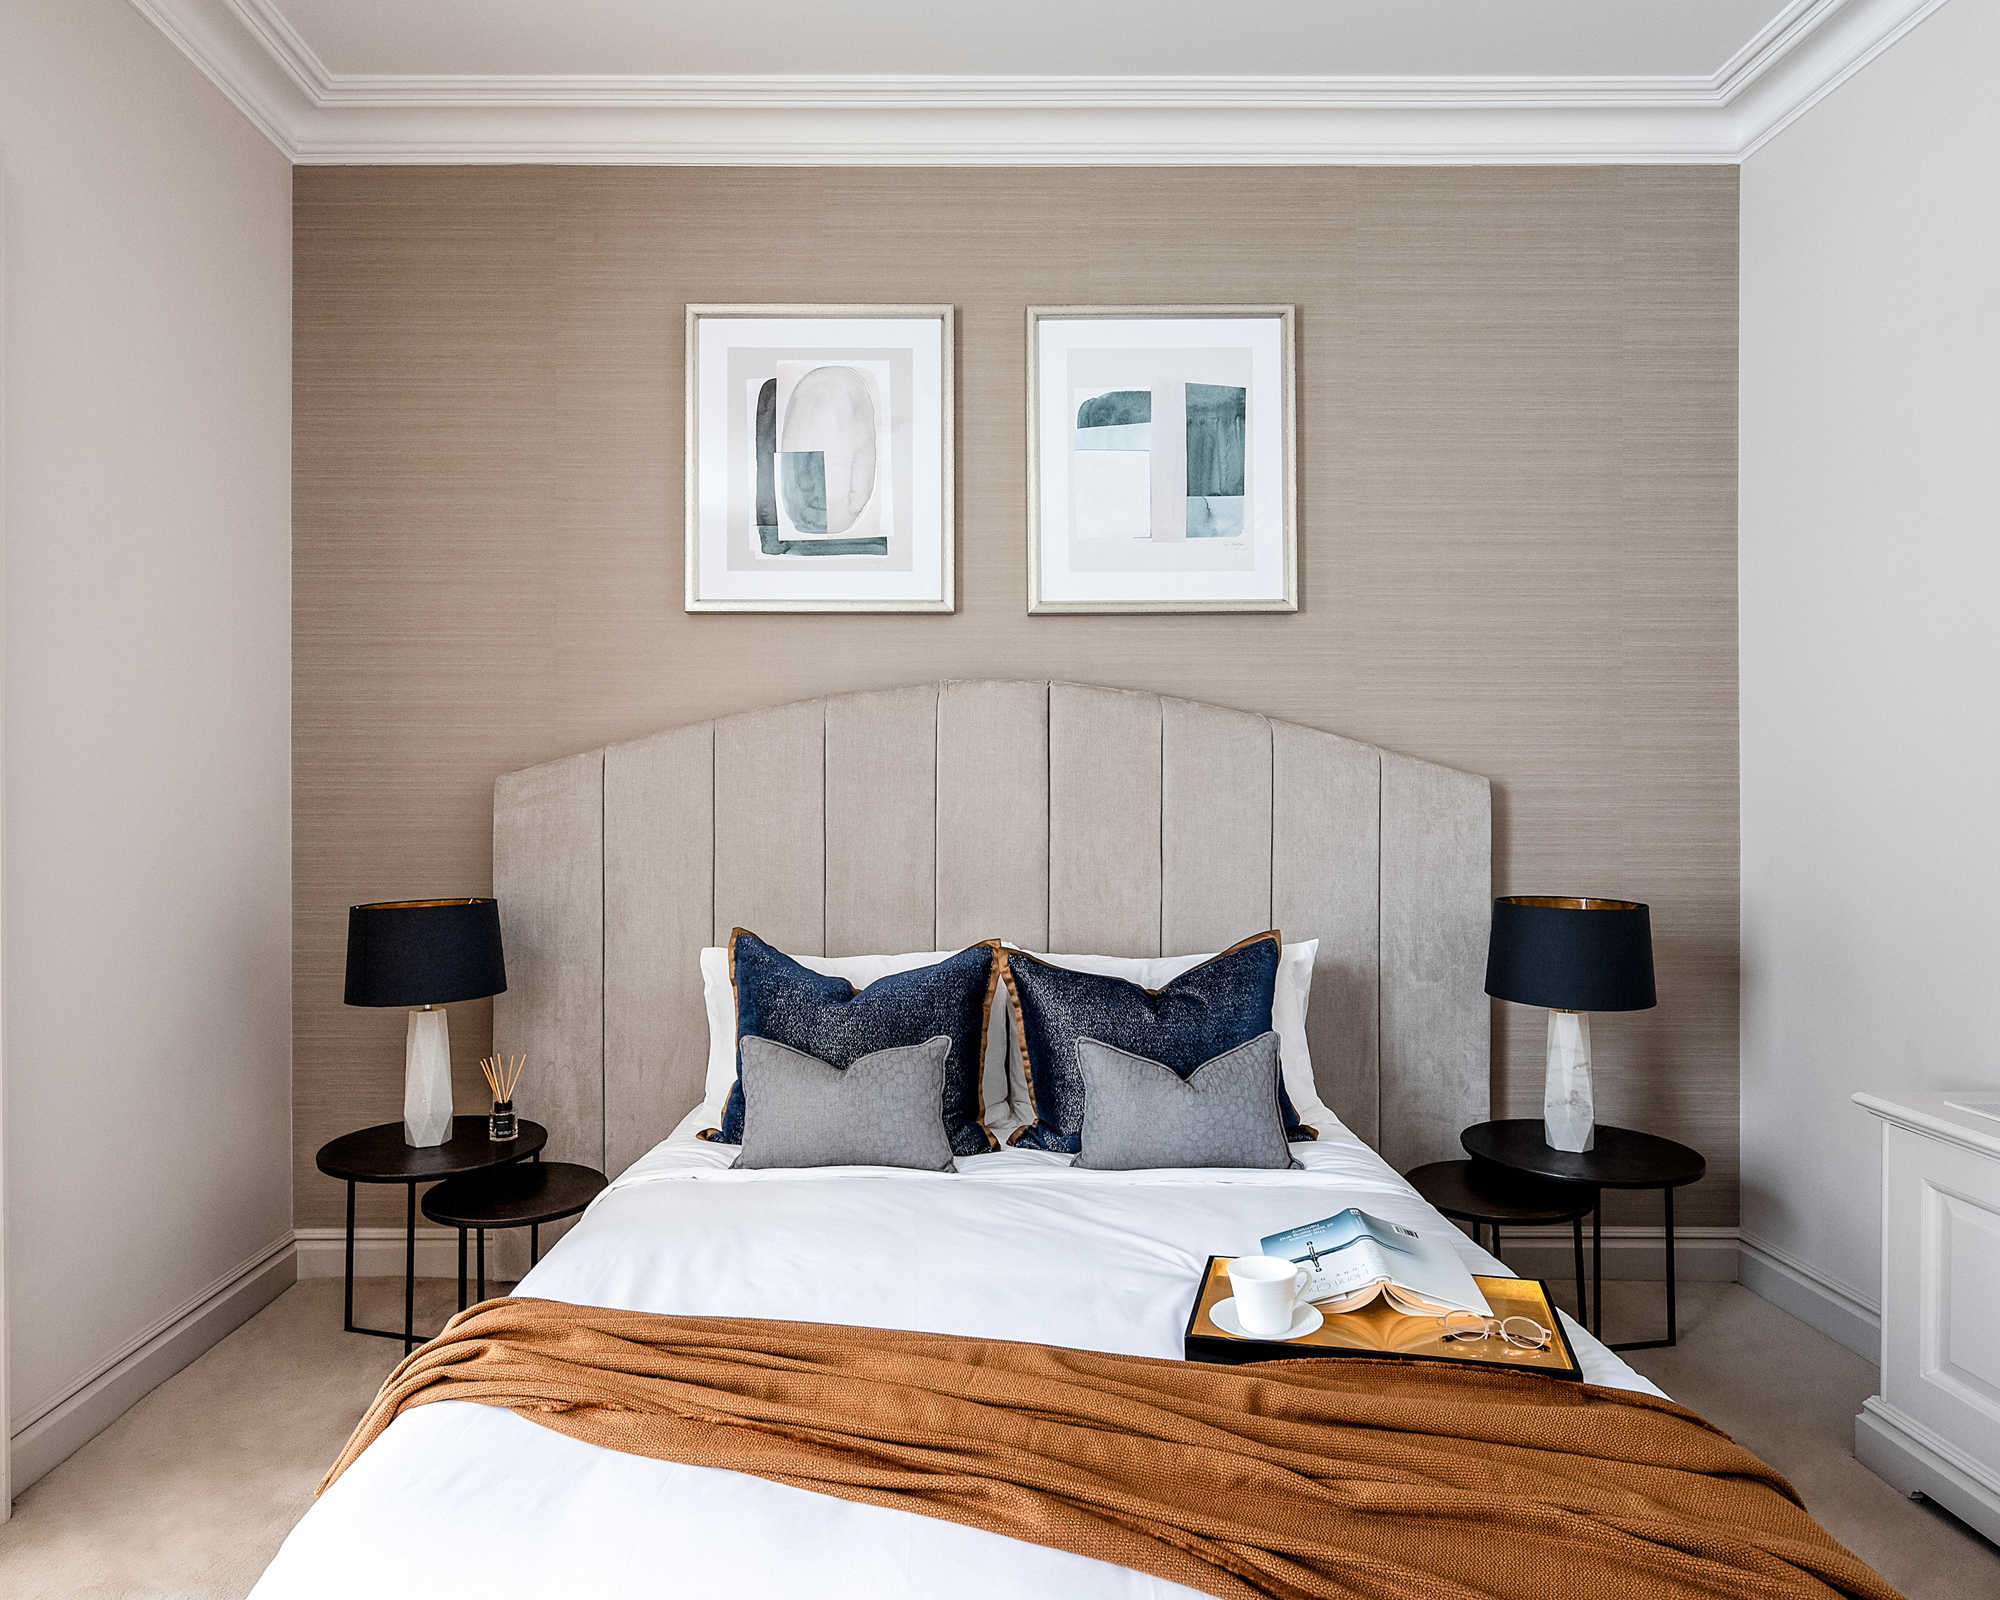 A grey bedroom idea with warm brown-grey walls, taupe headboard and an ochre throw on the bed